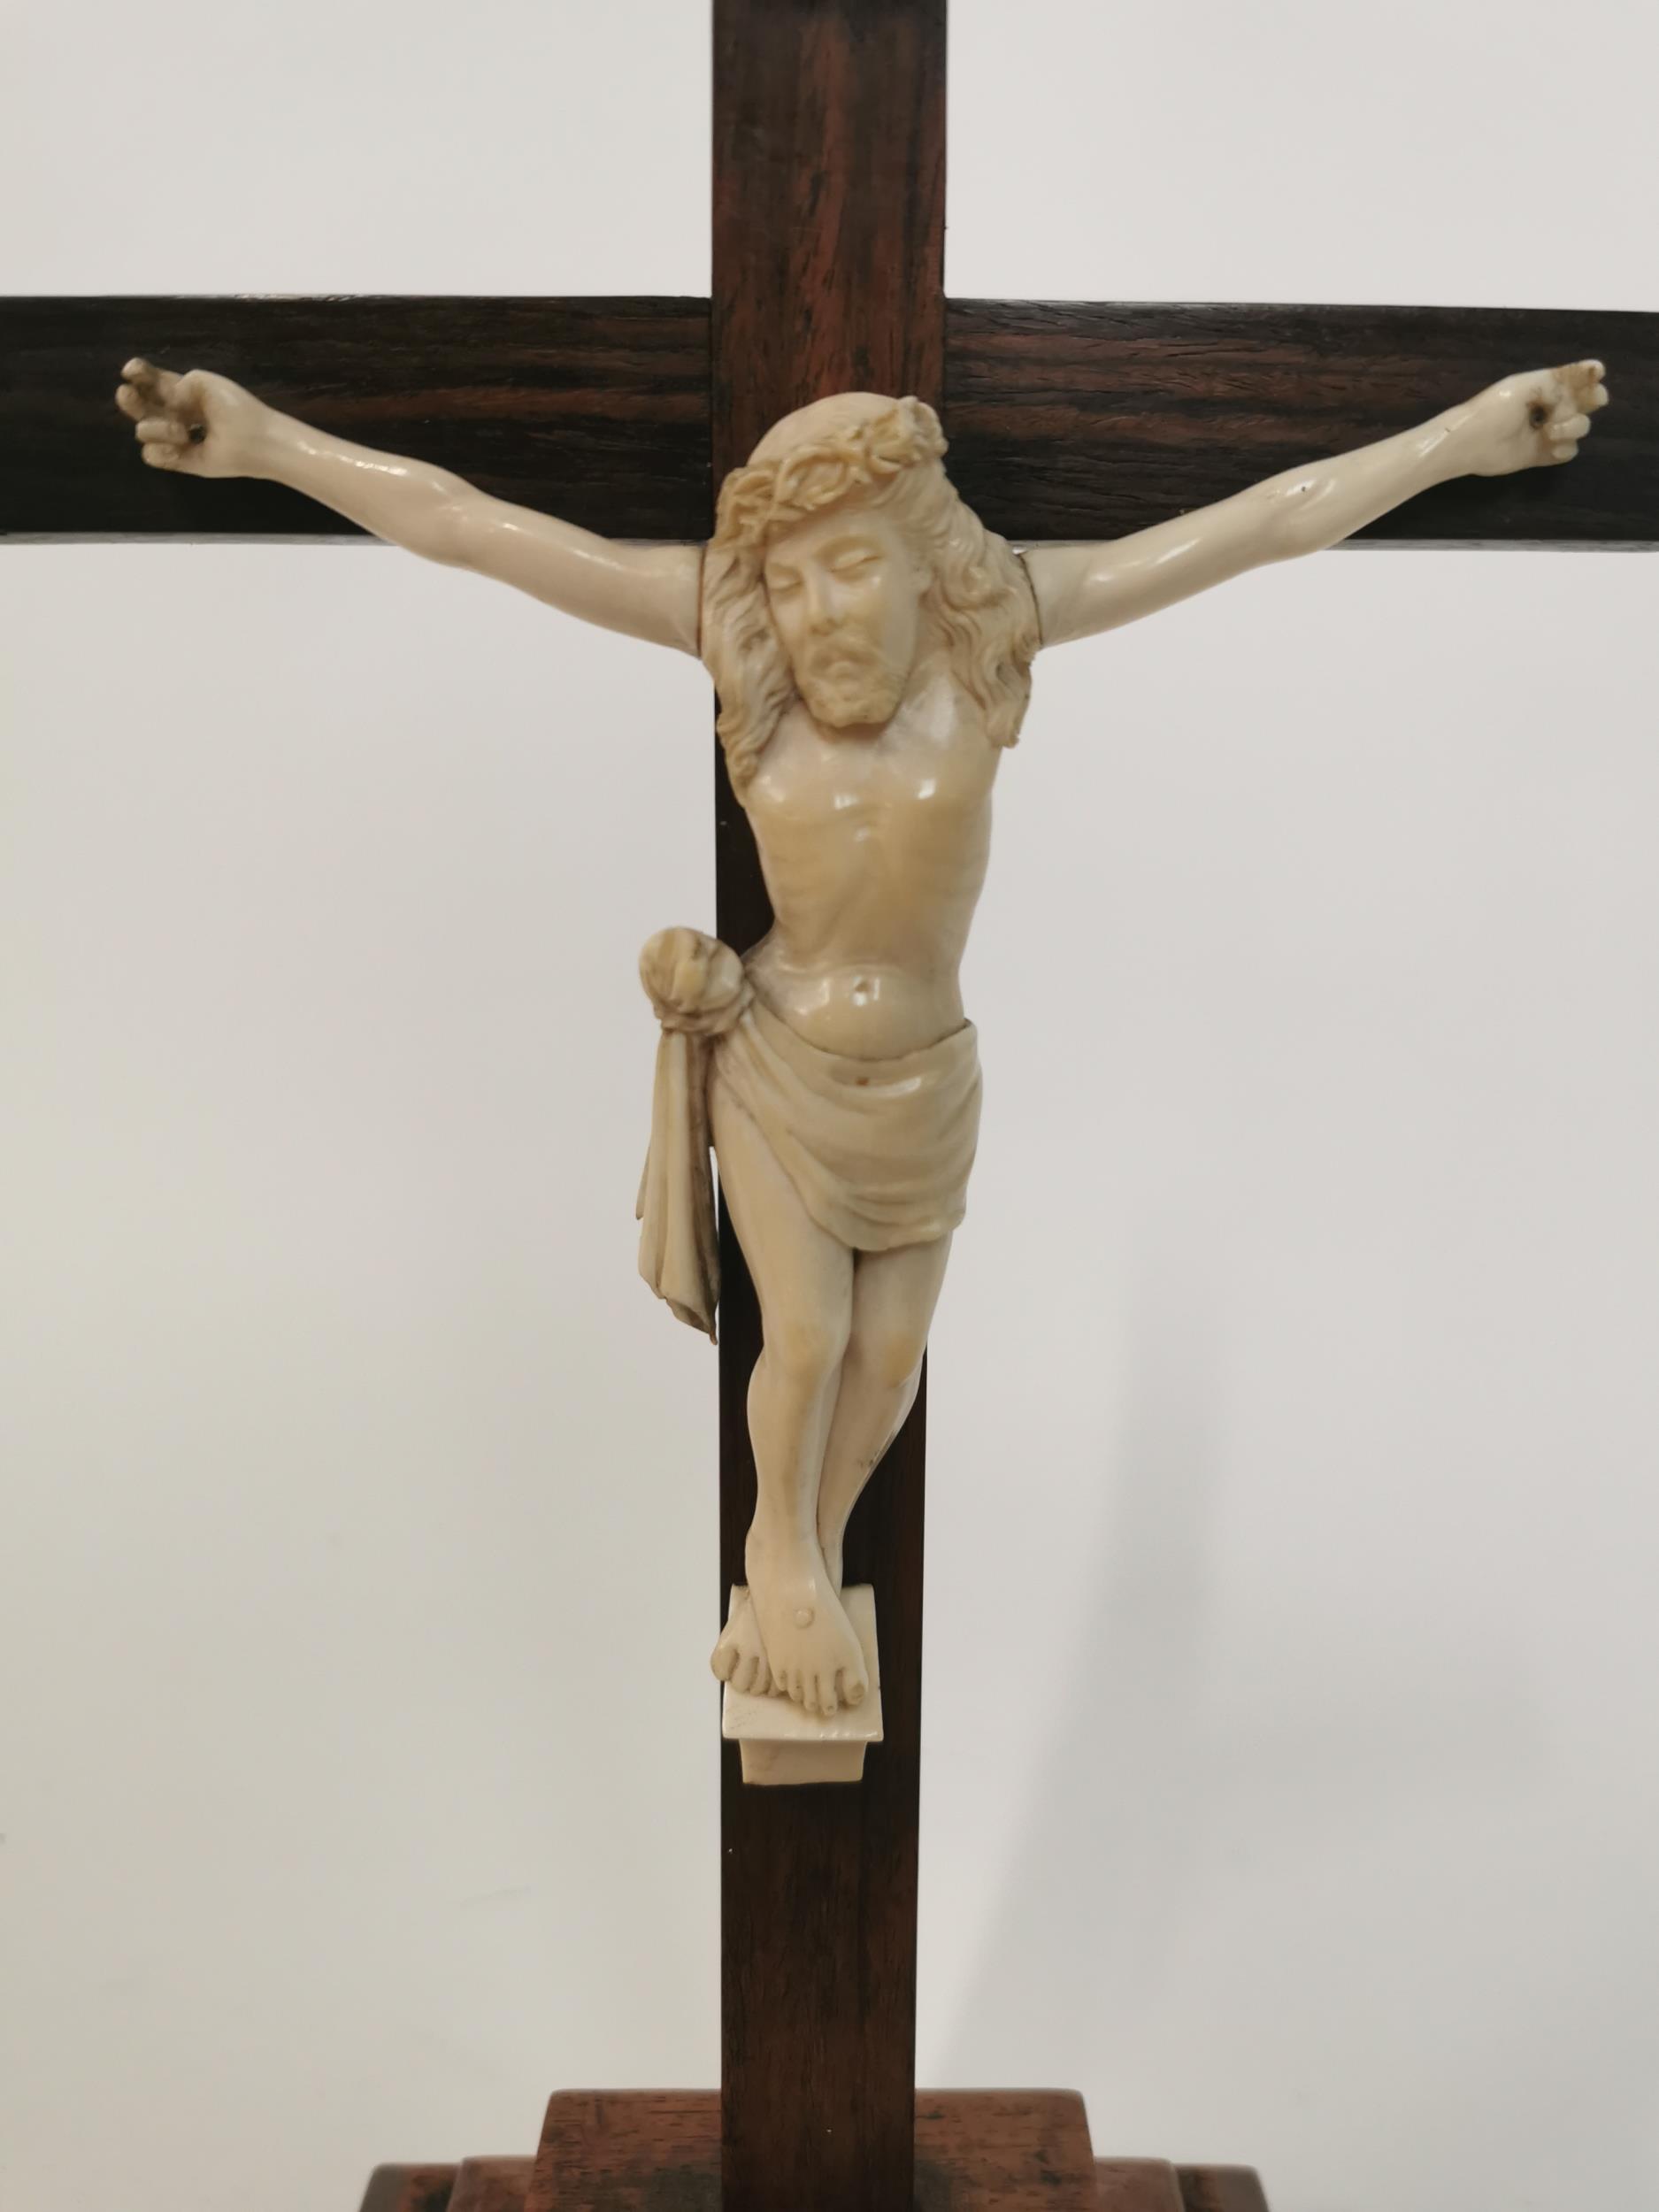 Carved oak and Ivory Crucifix. {34 cm H x 17 cm W x 11 cm D}. - Image 3 of 6